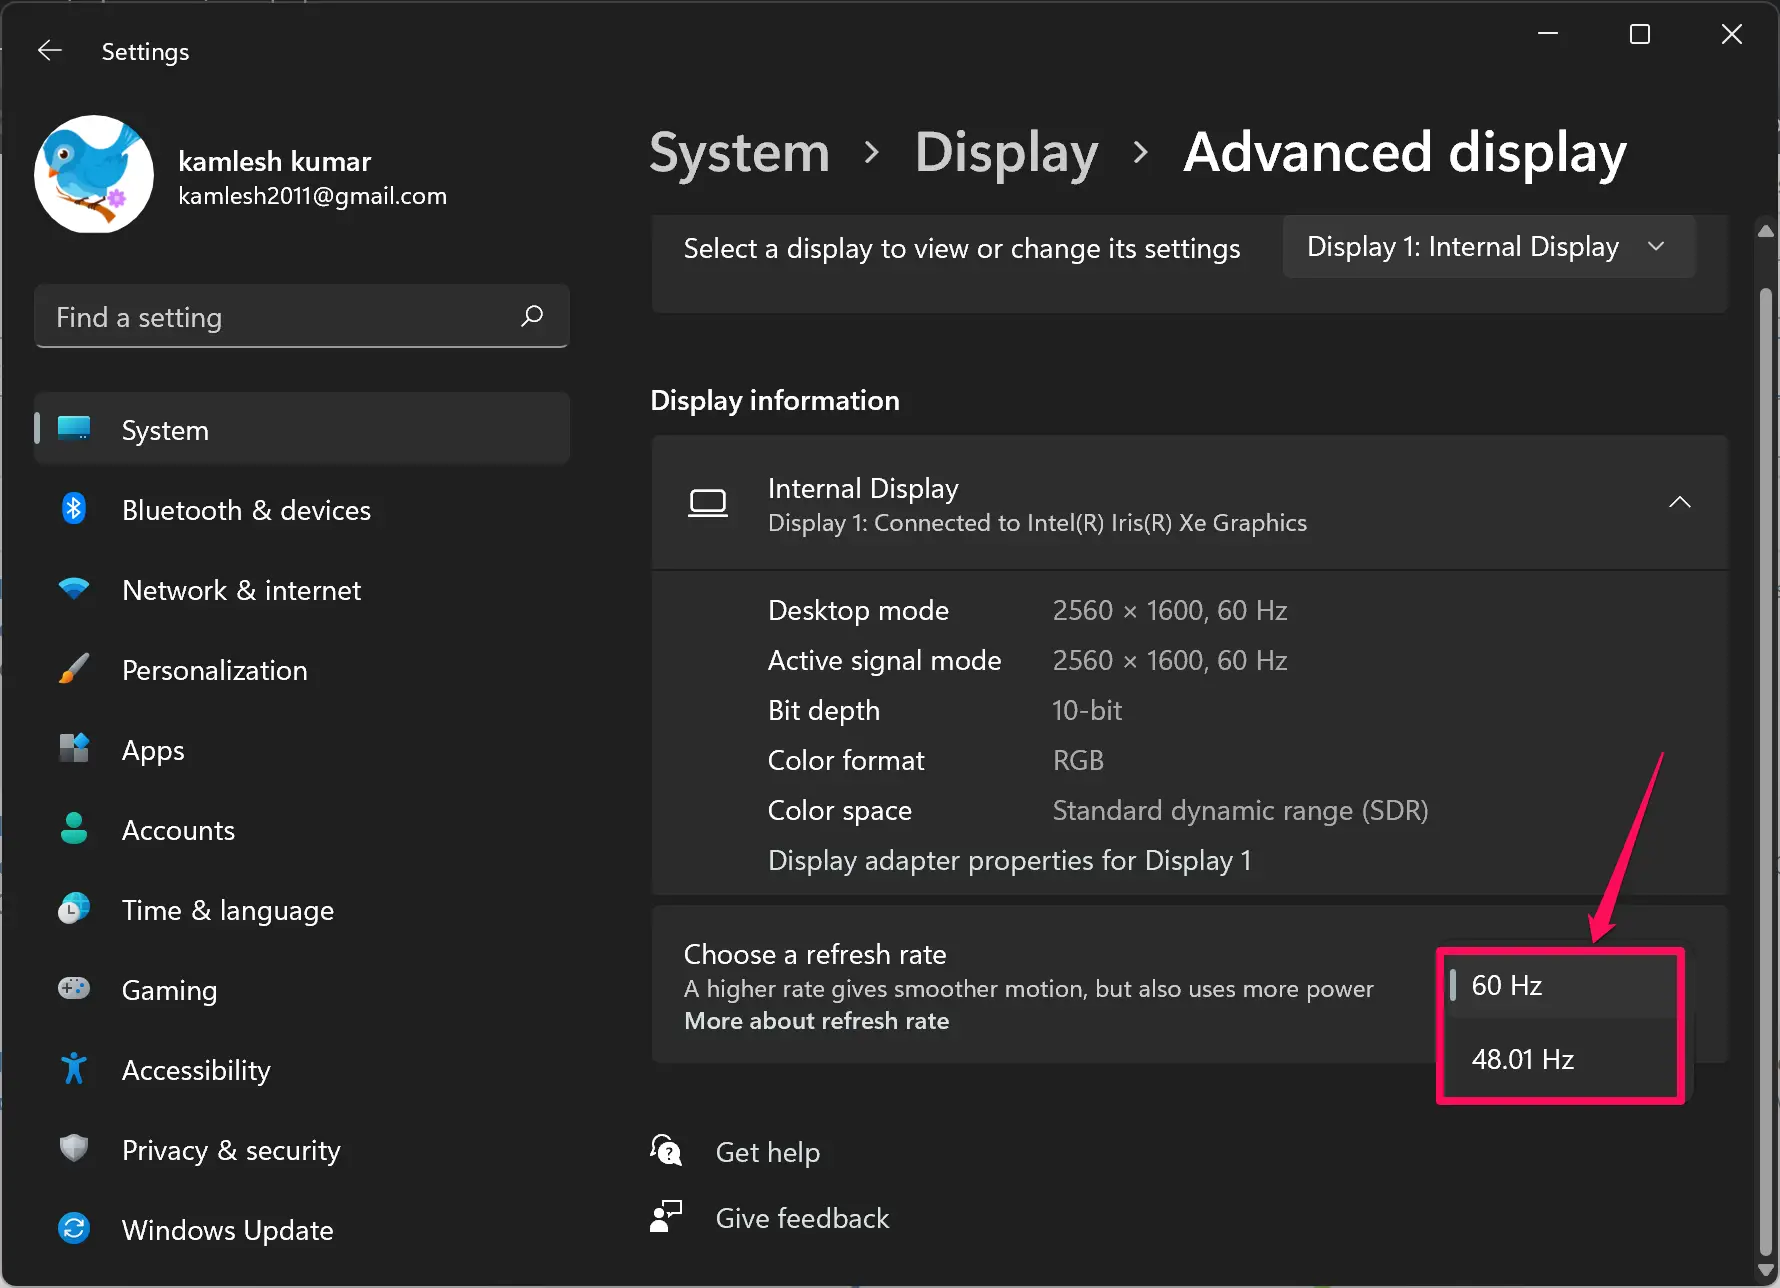 Settings menu with refresh rate option